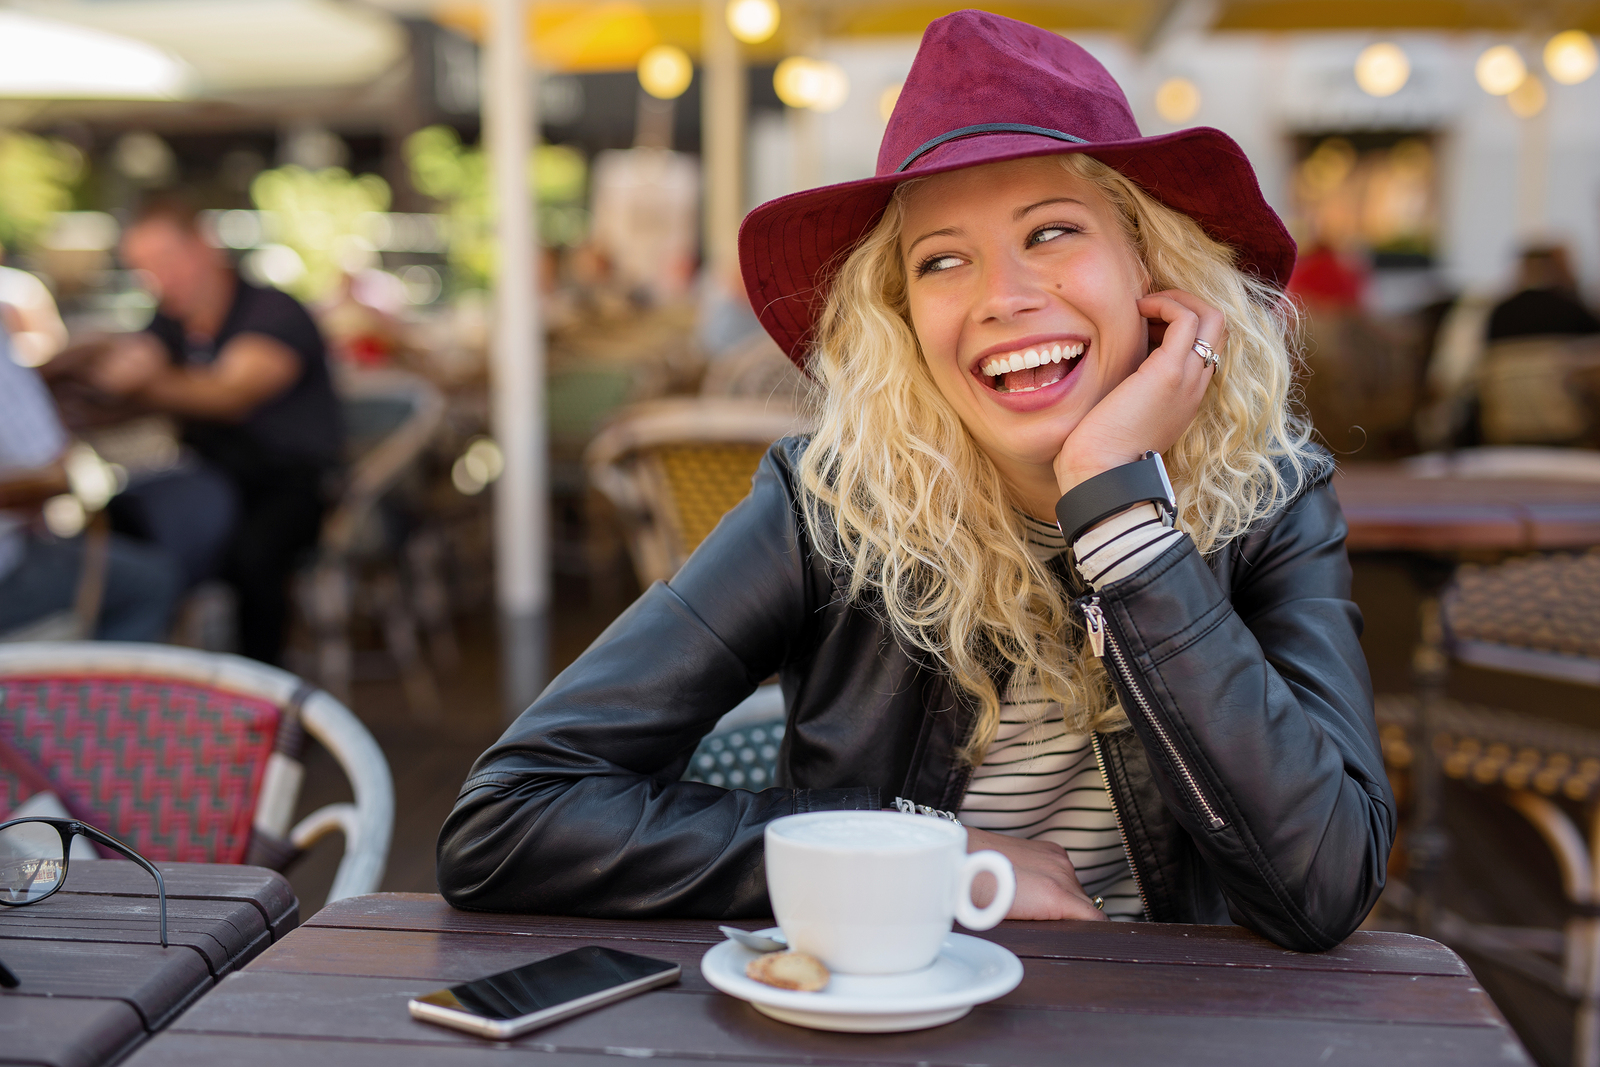 Beautiful woman with red hat laughing while on coffee break